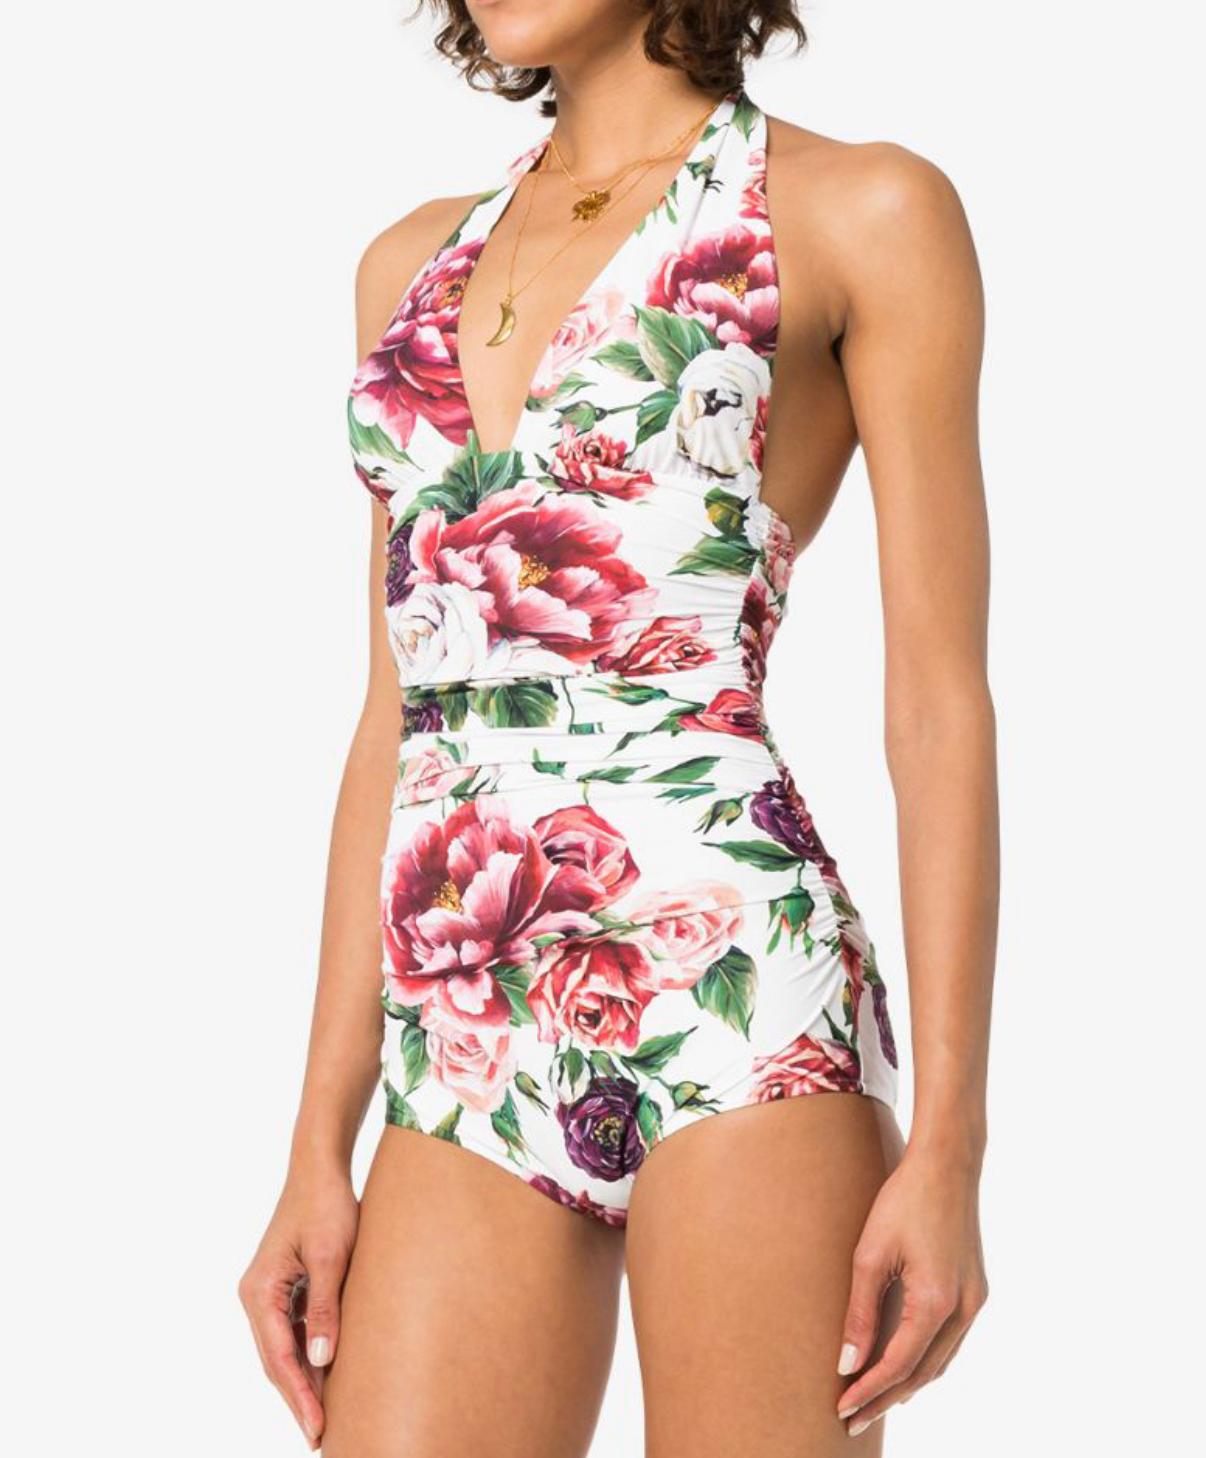 Stunning Dolce & Gabbana one-piece swimsuit which is draped on the sides is made from a precious fabric in the romantic PEONY ROSE print and has an extraordinarily sophisticated look. 
Perfect for both the poolside and as a top for a cocktail party.